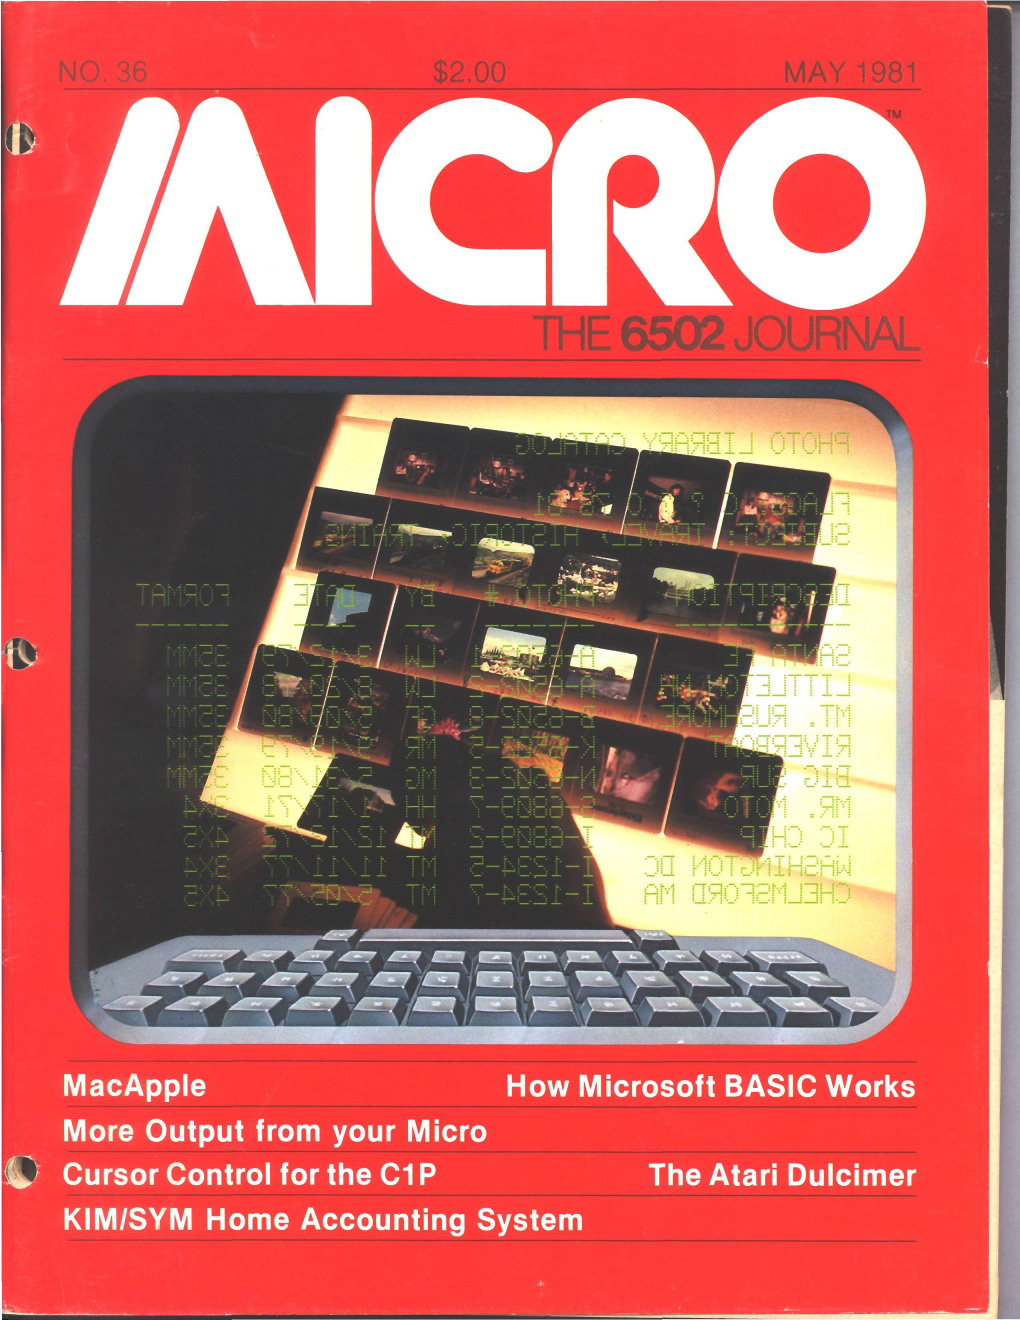 Macapple How Microsoft BASIC Works More Output from Your Micro C Cursor Control for the C1P the Atari Dulcimer KIM/SYM Home Accounting System You Can Use MICRO PLUS